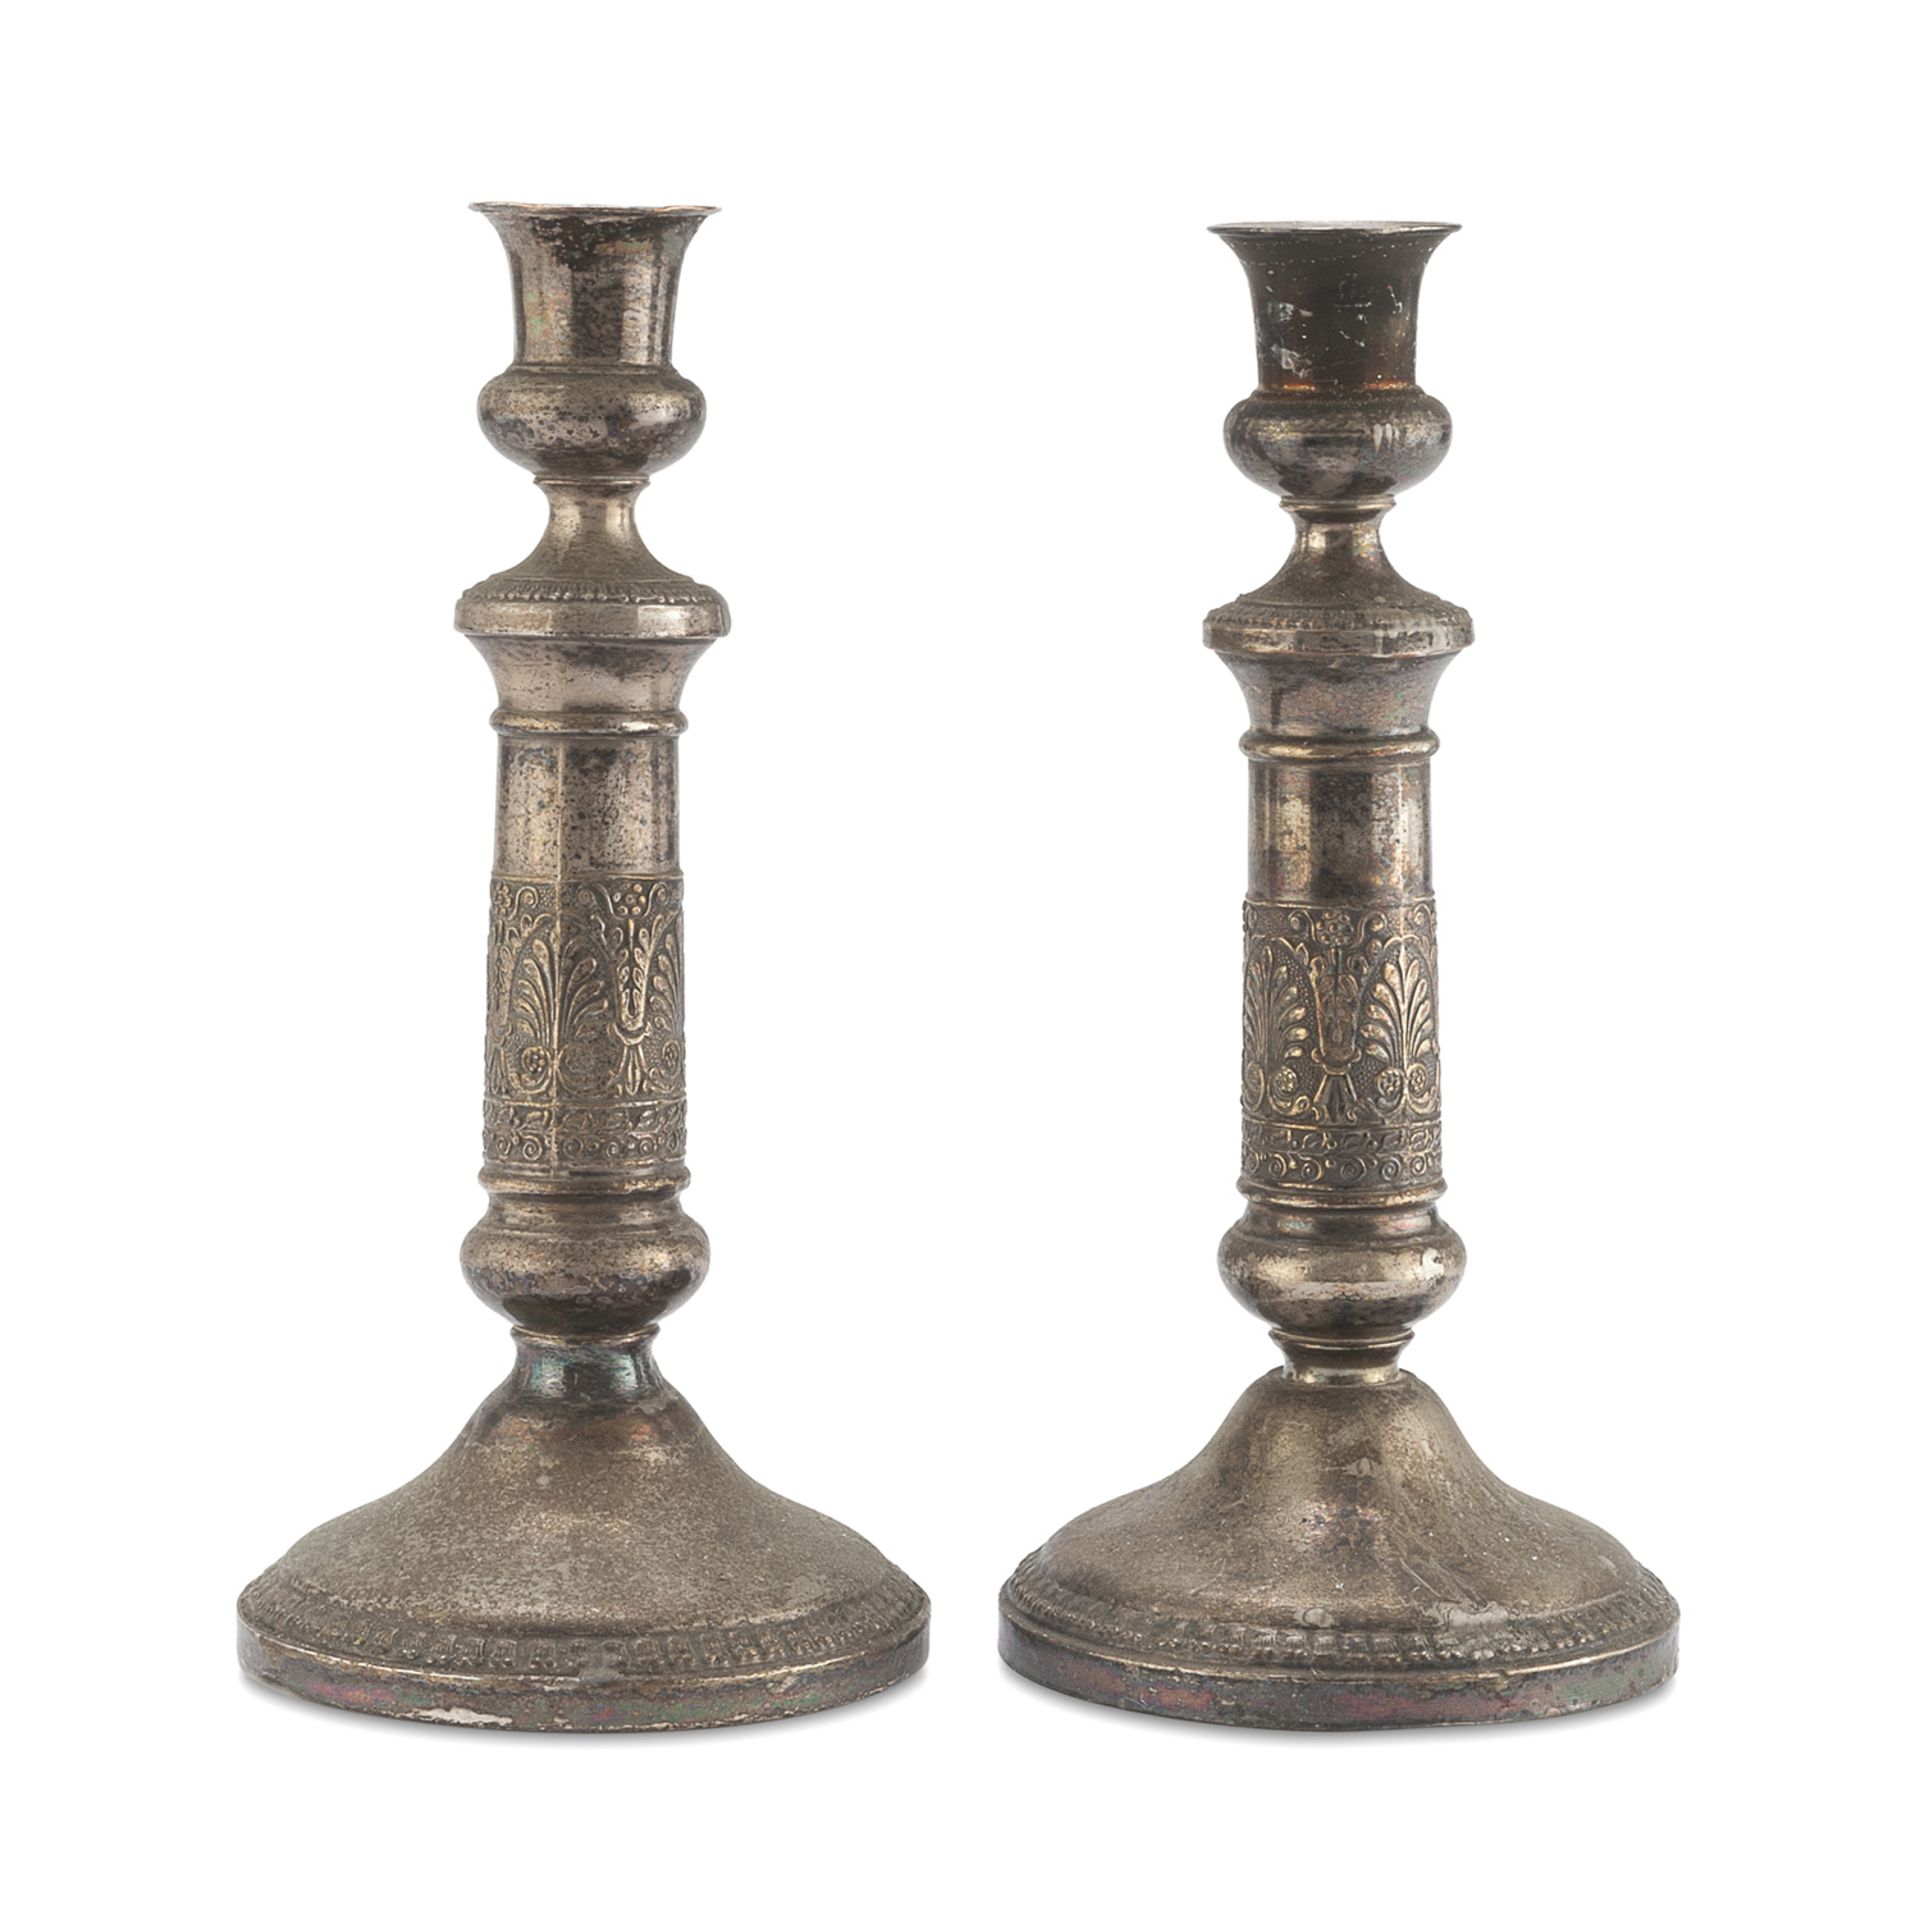 PAIR OF SILVER-PLATED CANDLESTICKS 19th CENTURY